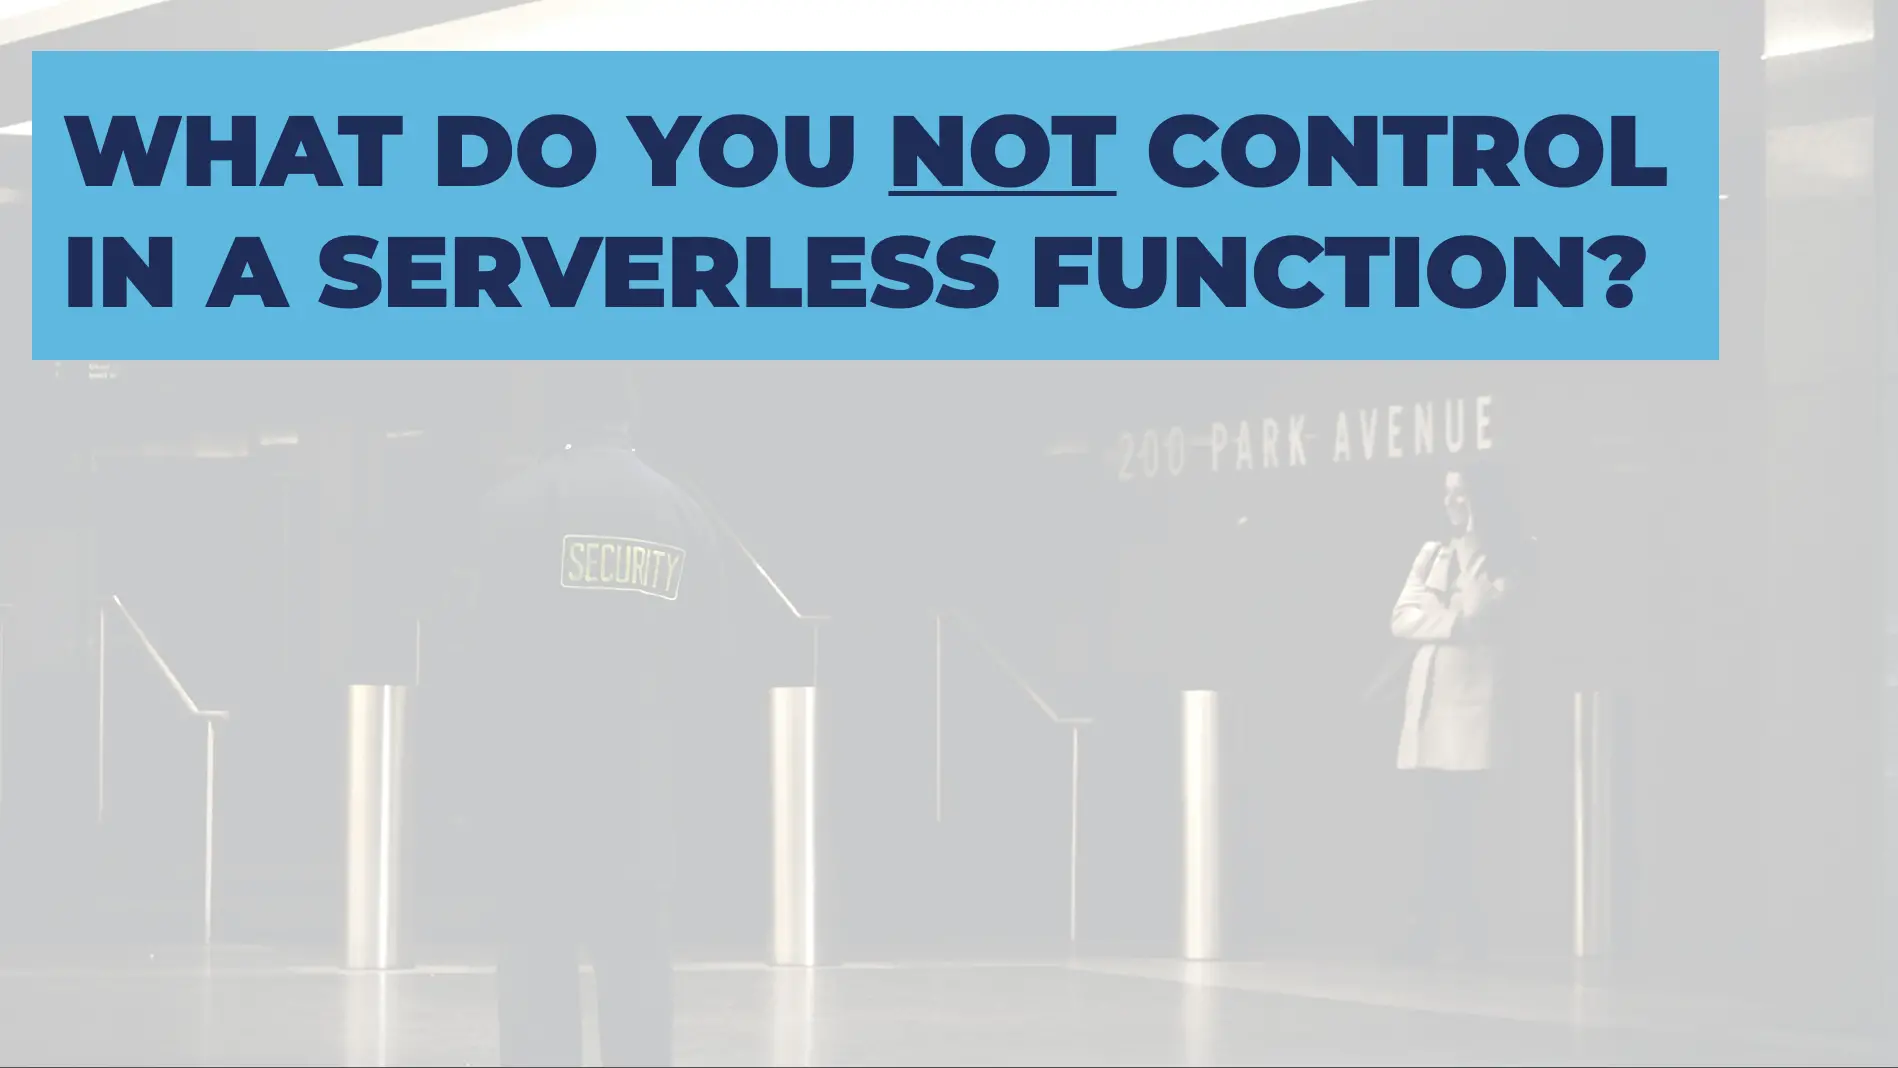 What You Don't Control Serverless